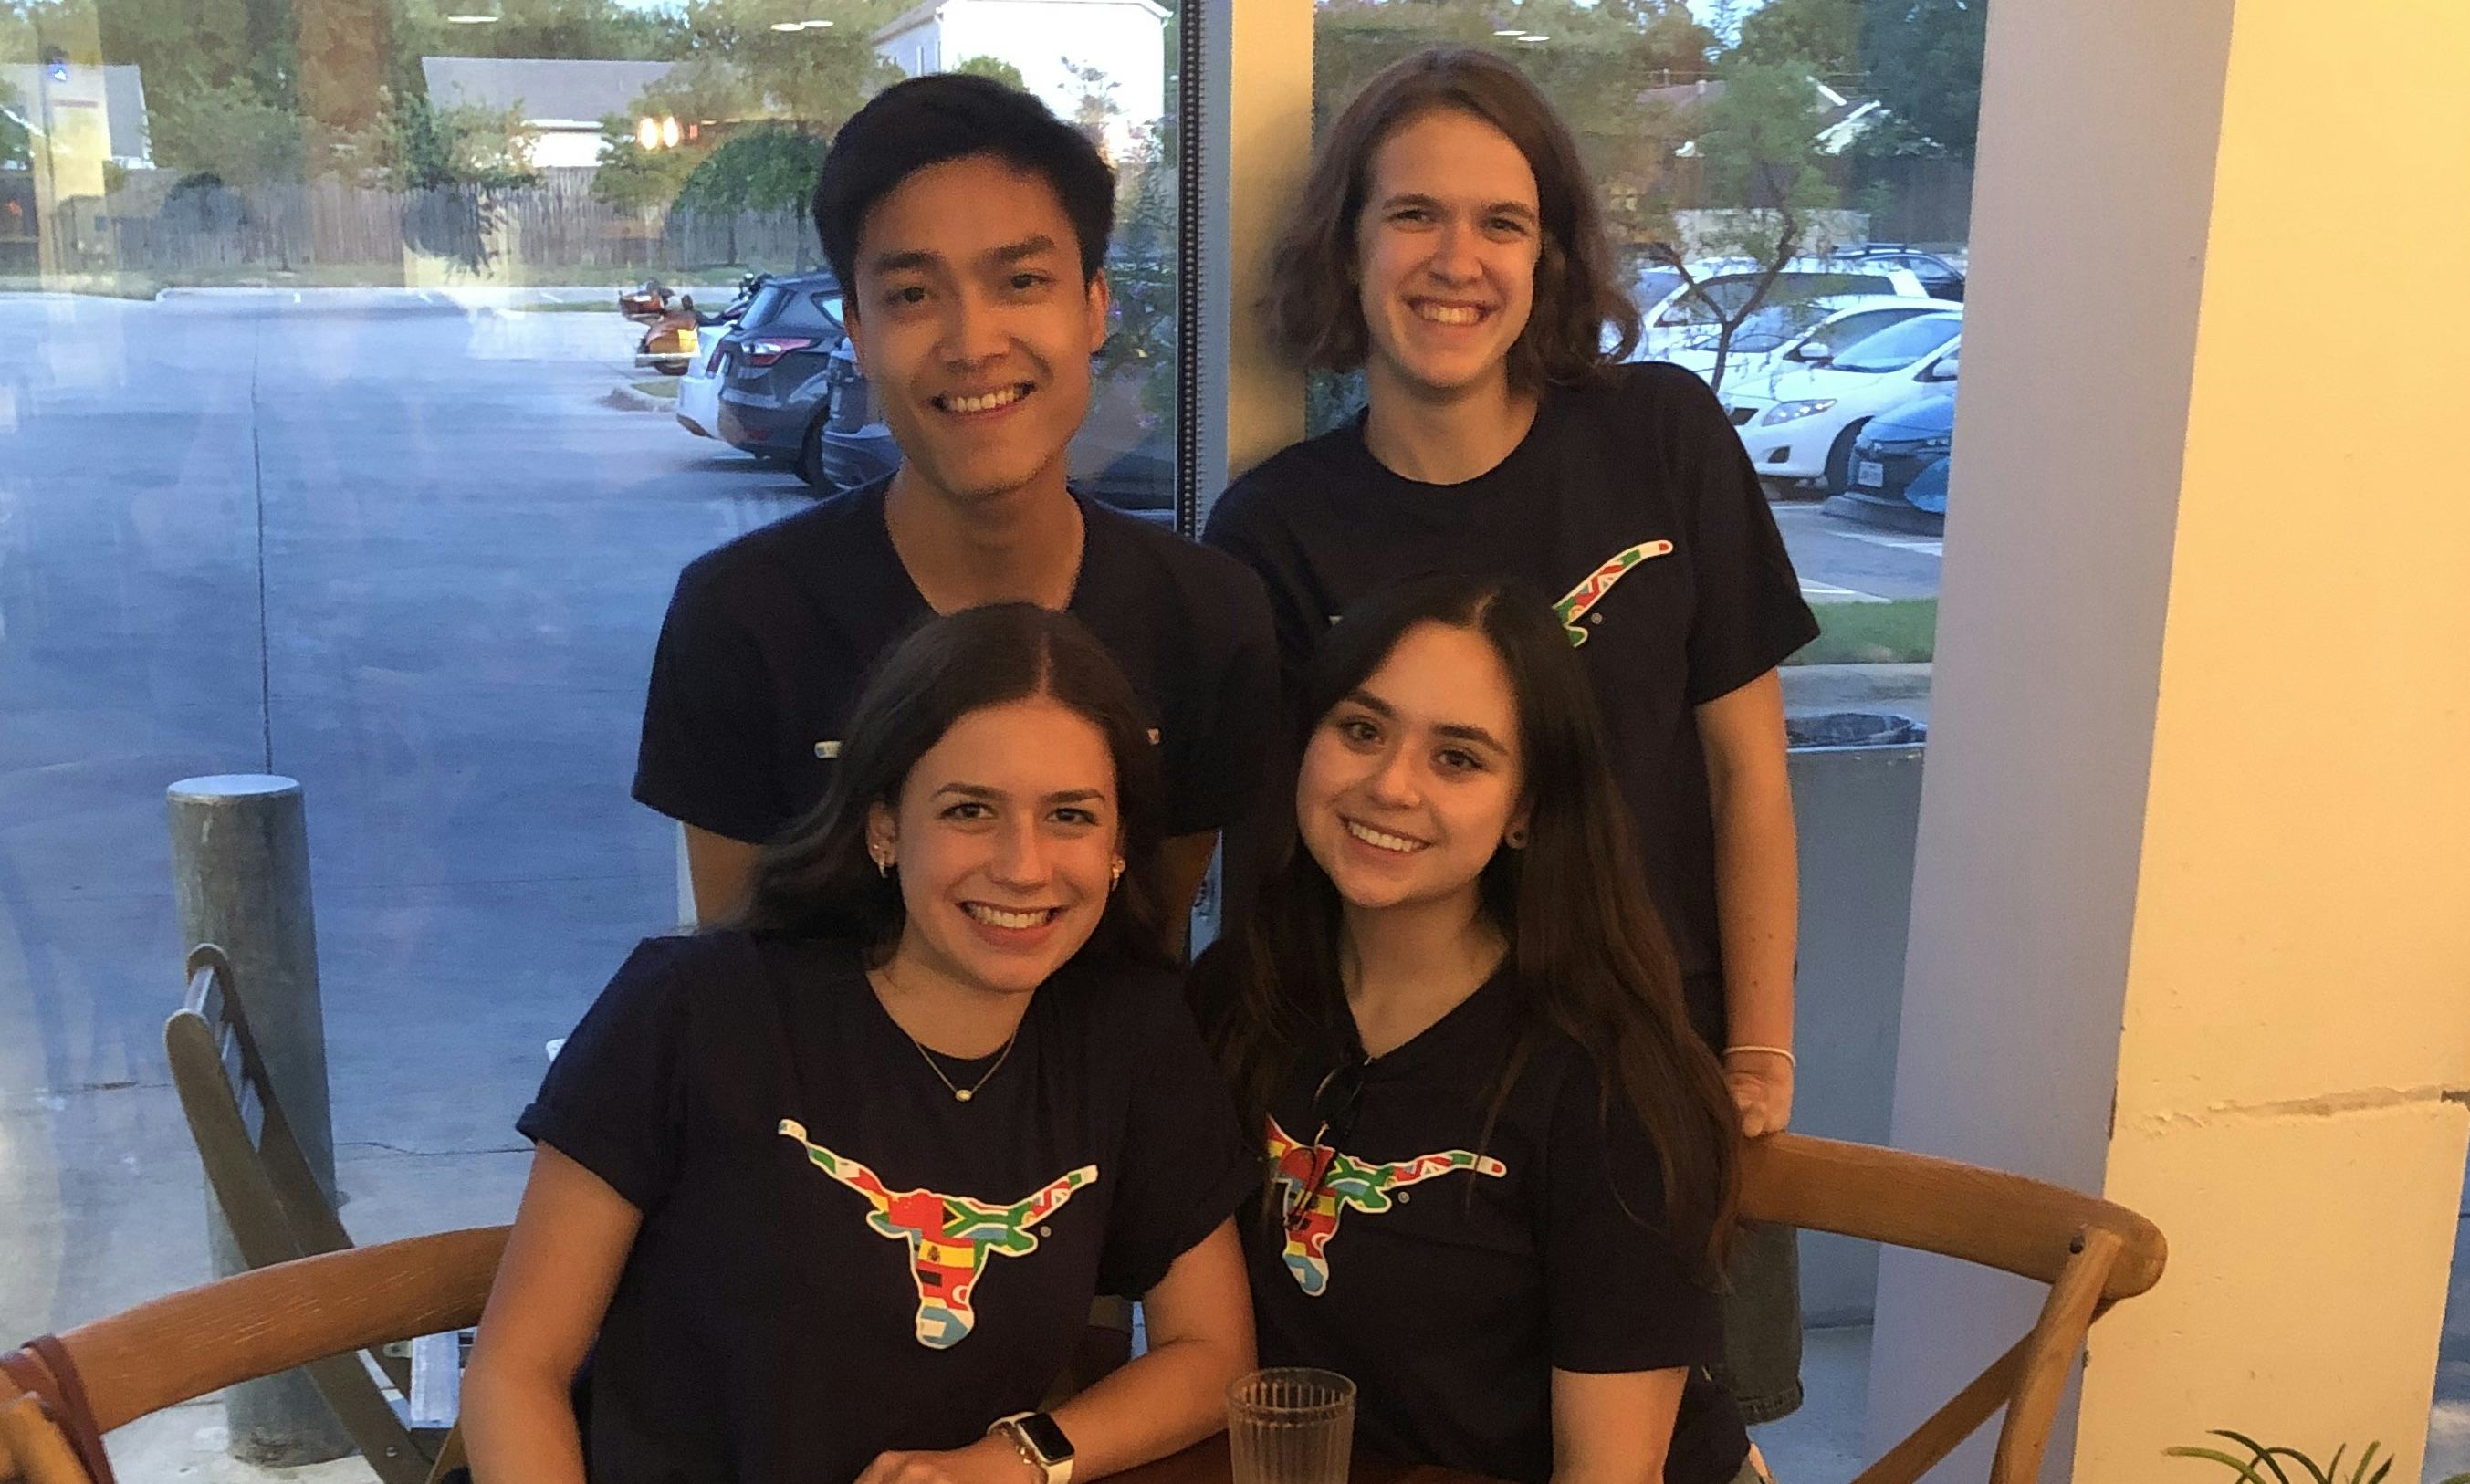 Four students in matching University of Texas tshirts